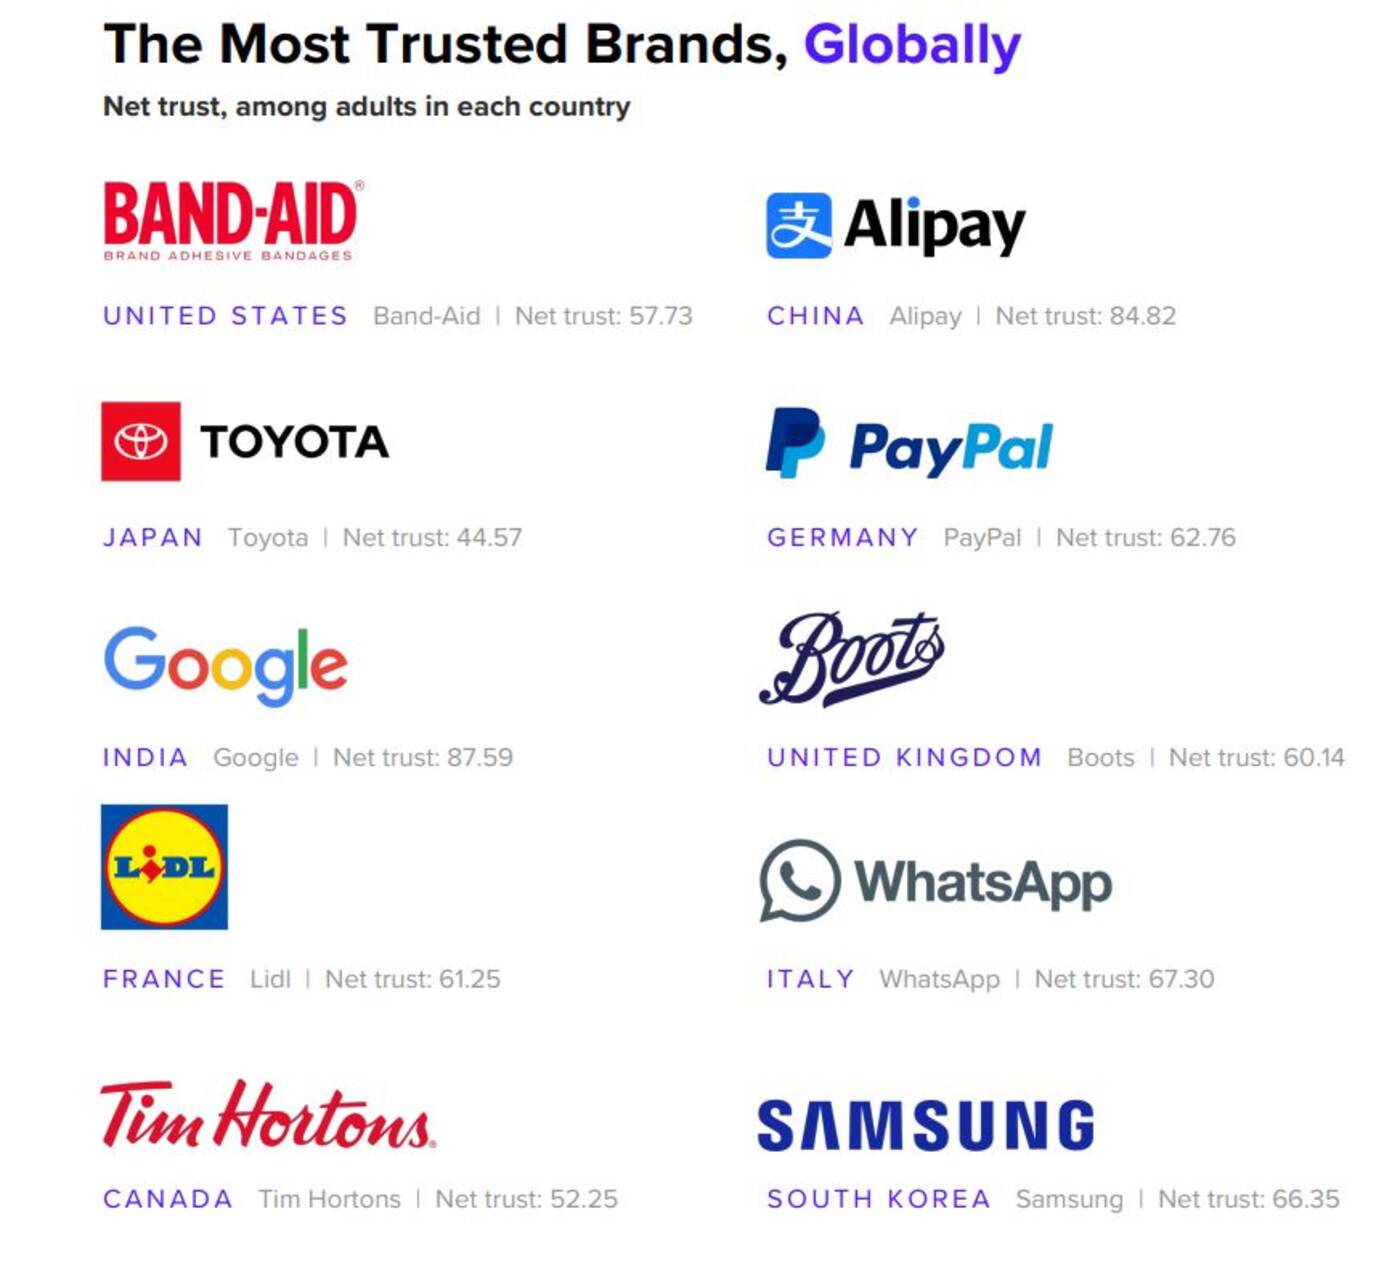 tim hortons most trusted brand